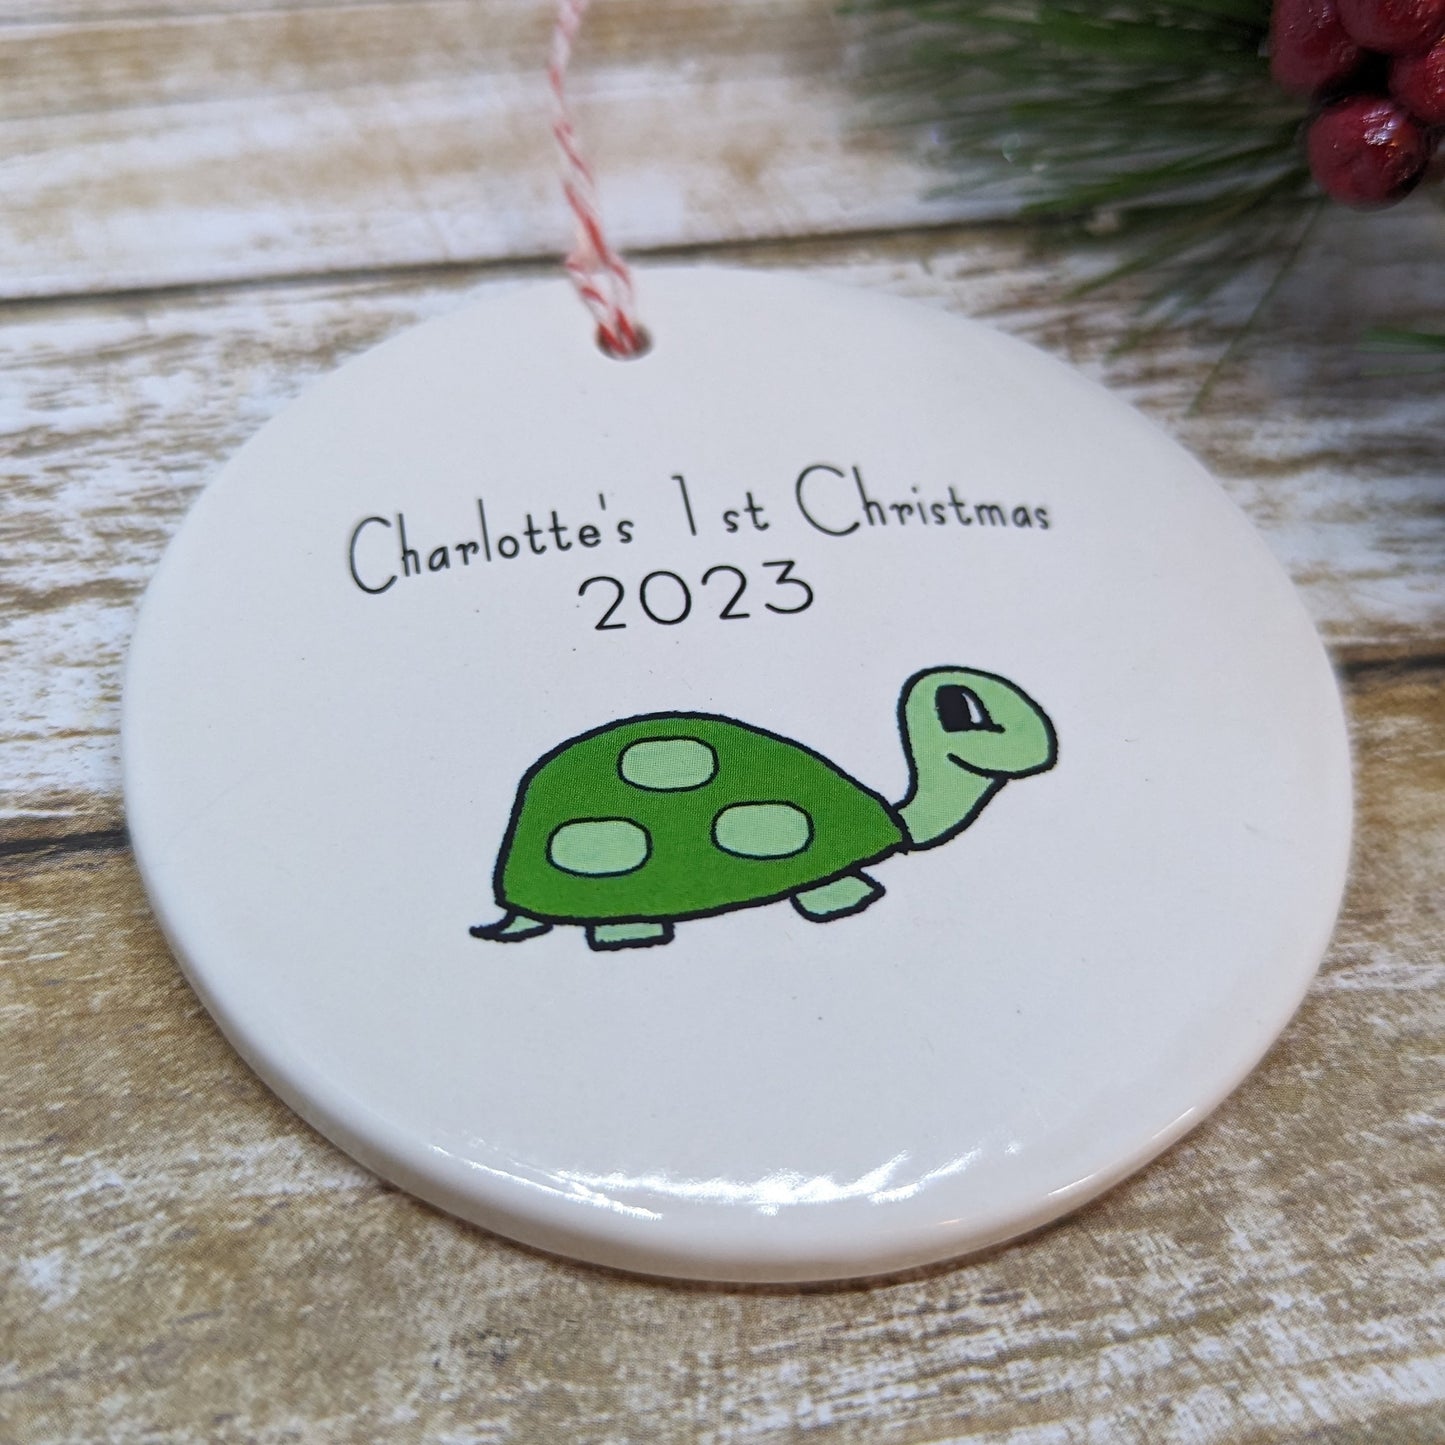 Baby's 1st Christmas Custom Ornament, Line Drawn Ornament, Minimalist Ornament - with your child's name